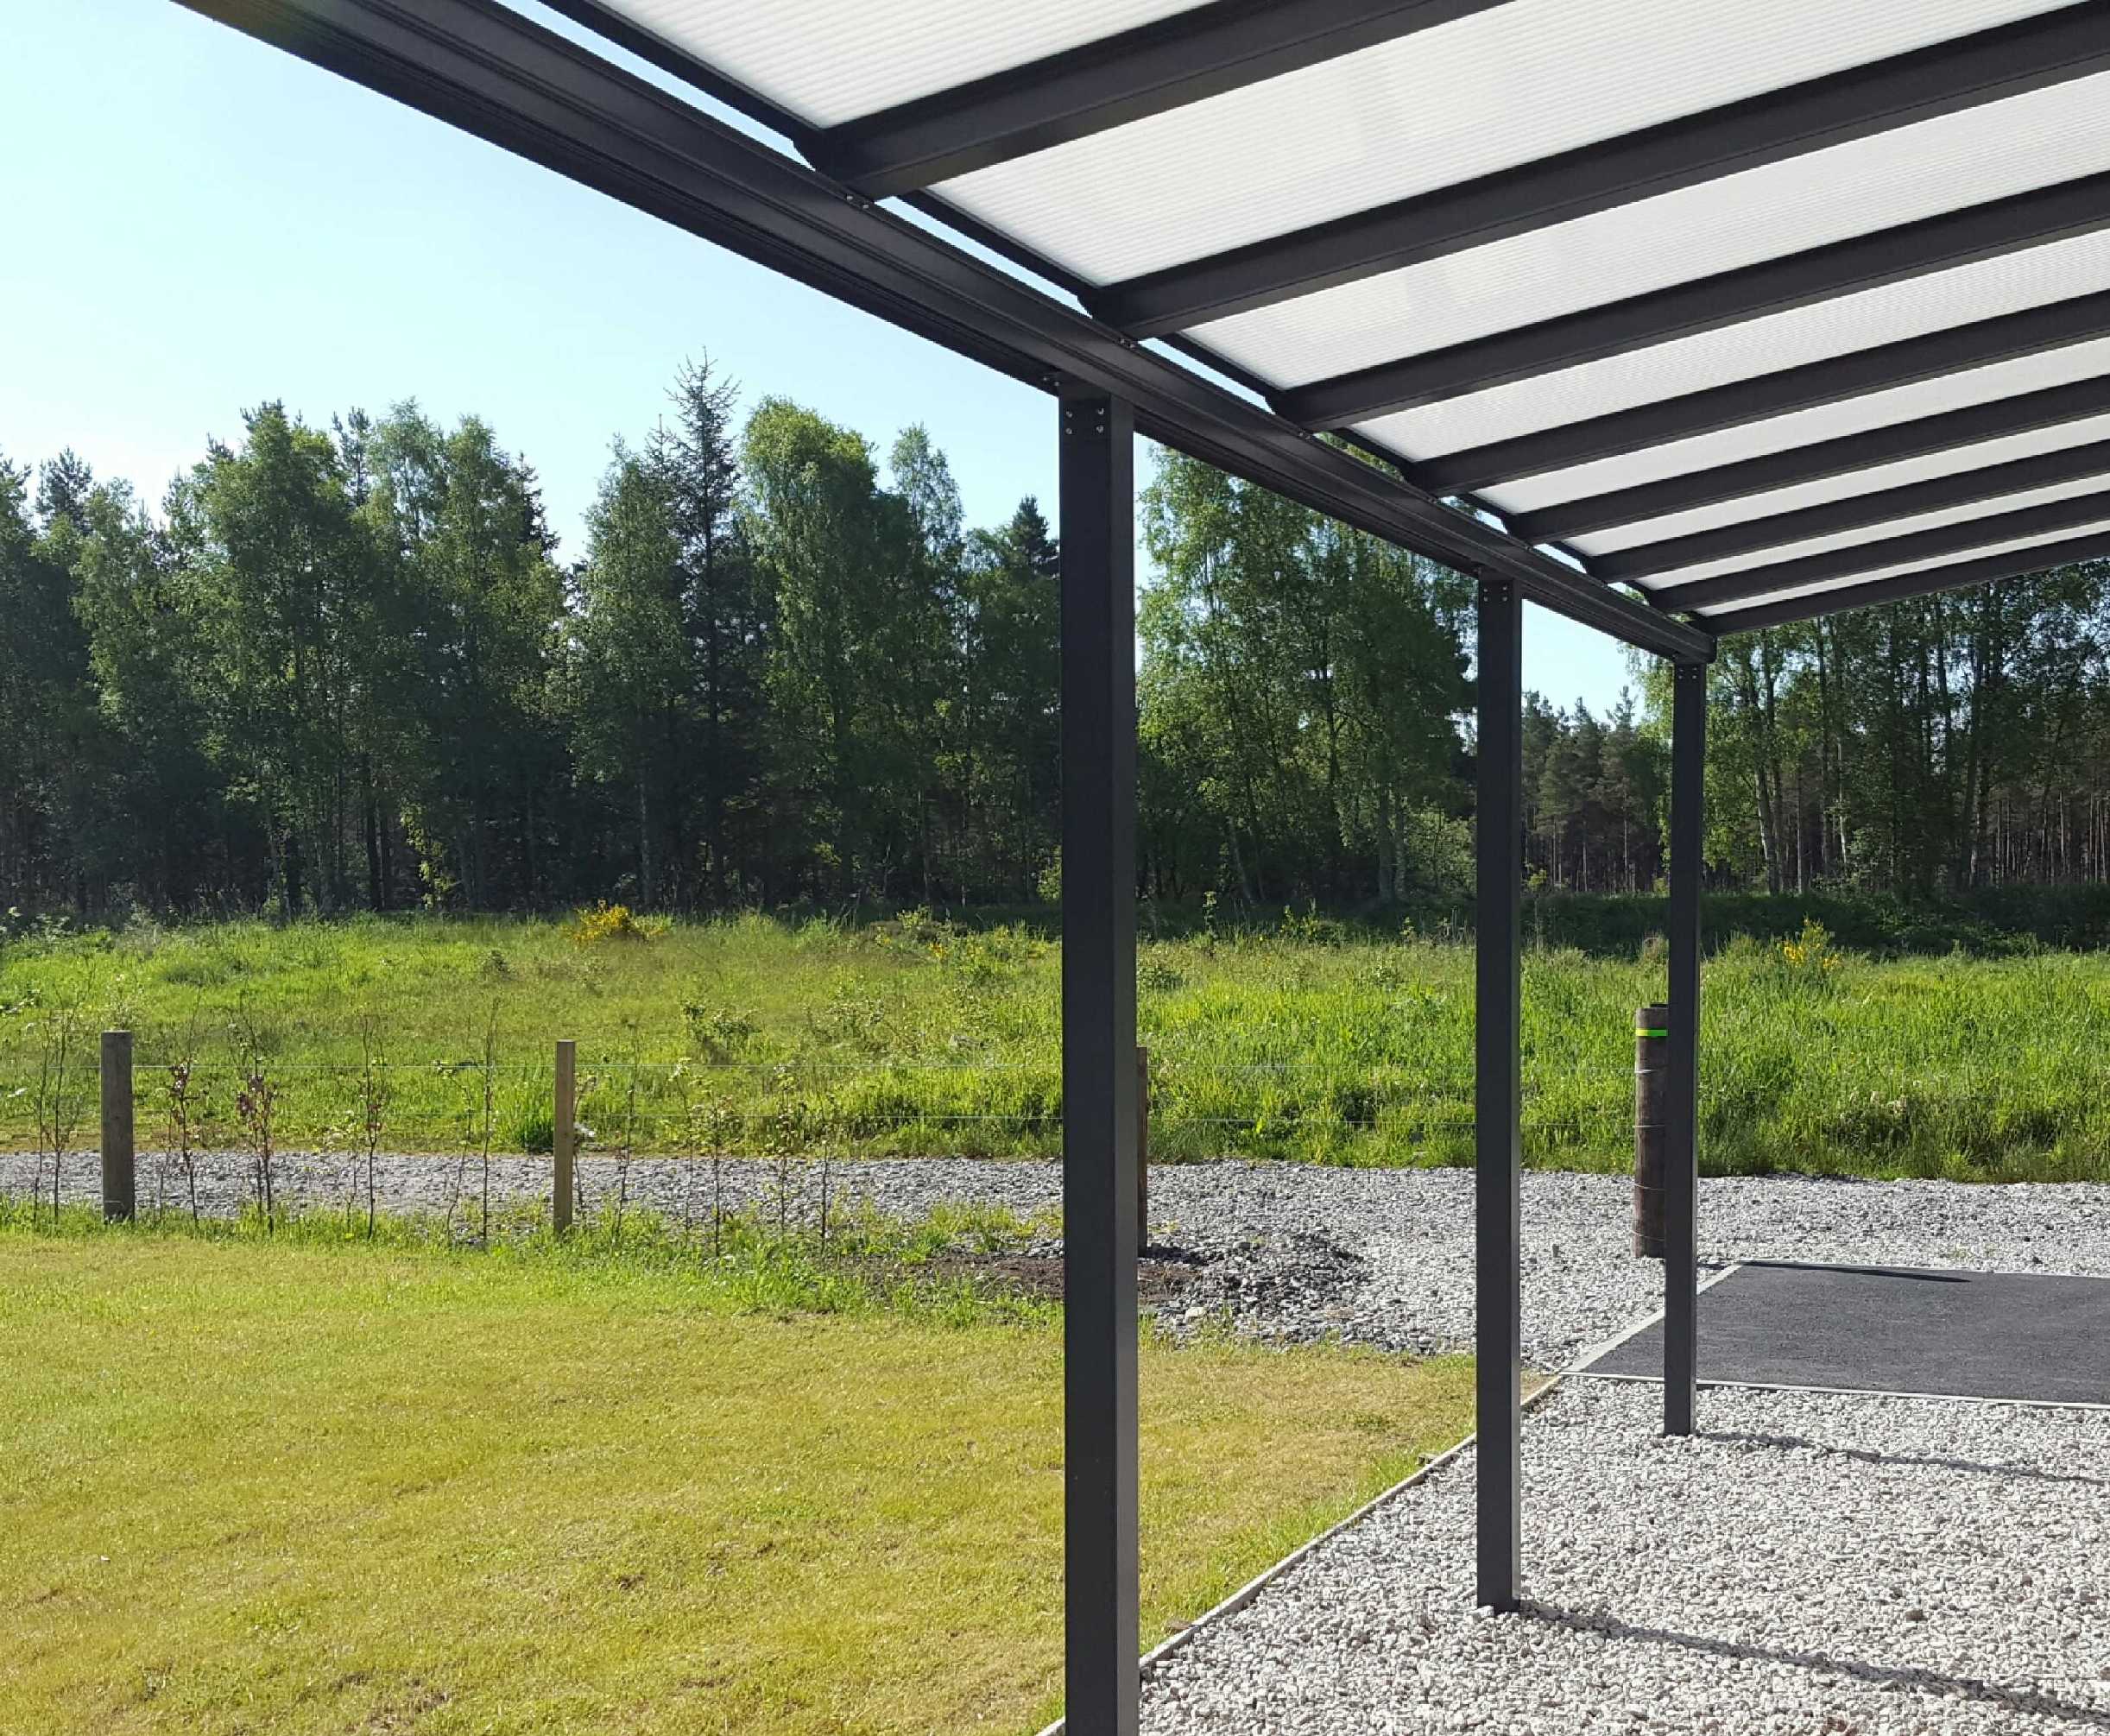 Omega Smart Lean-To Canopy, Anthracite Grey, 6mm Glass Clear Plate Polycarbonate Glazing - 4.9m (W) x 2.0m (P), (3) Supporting Posts